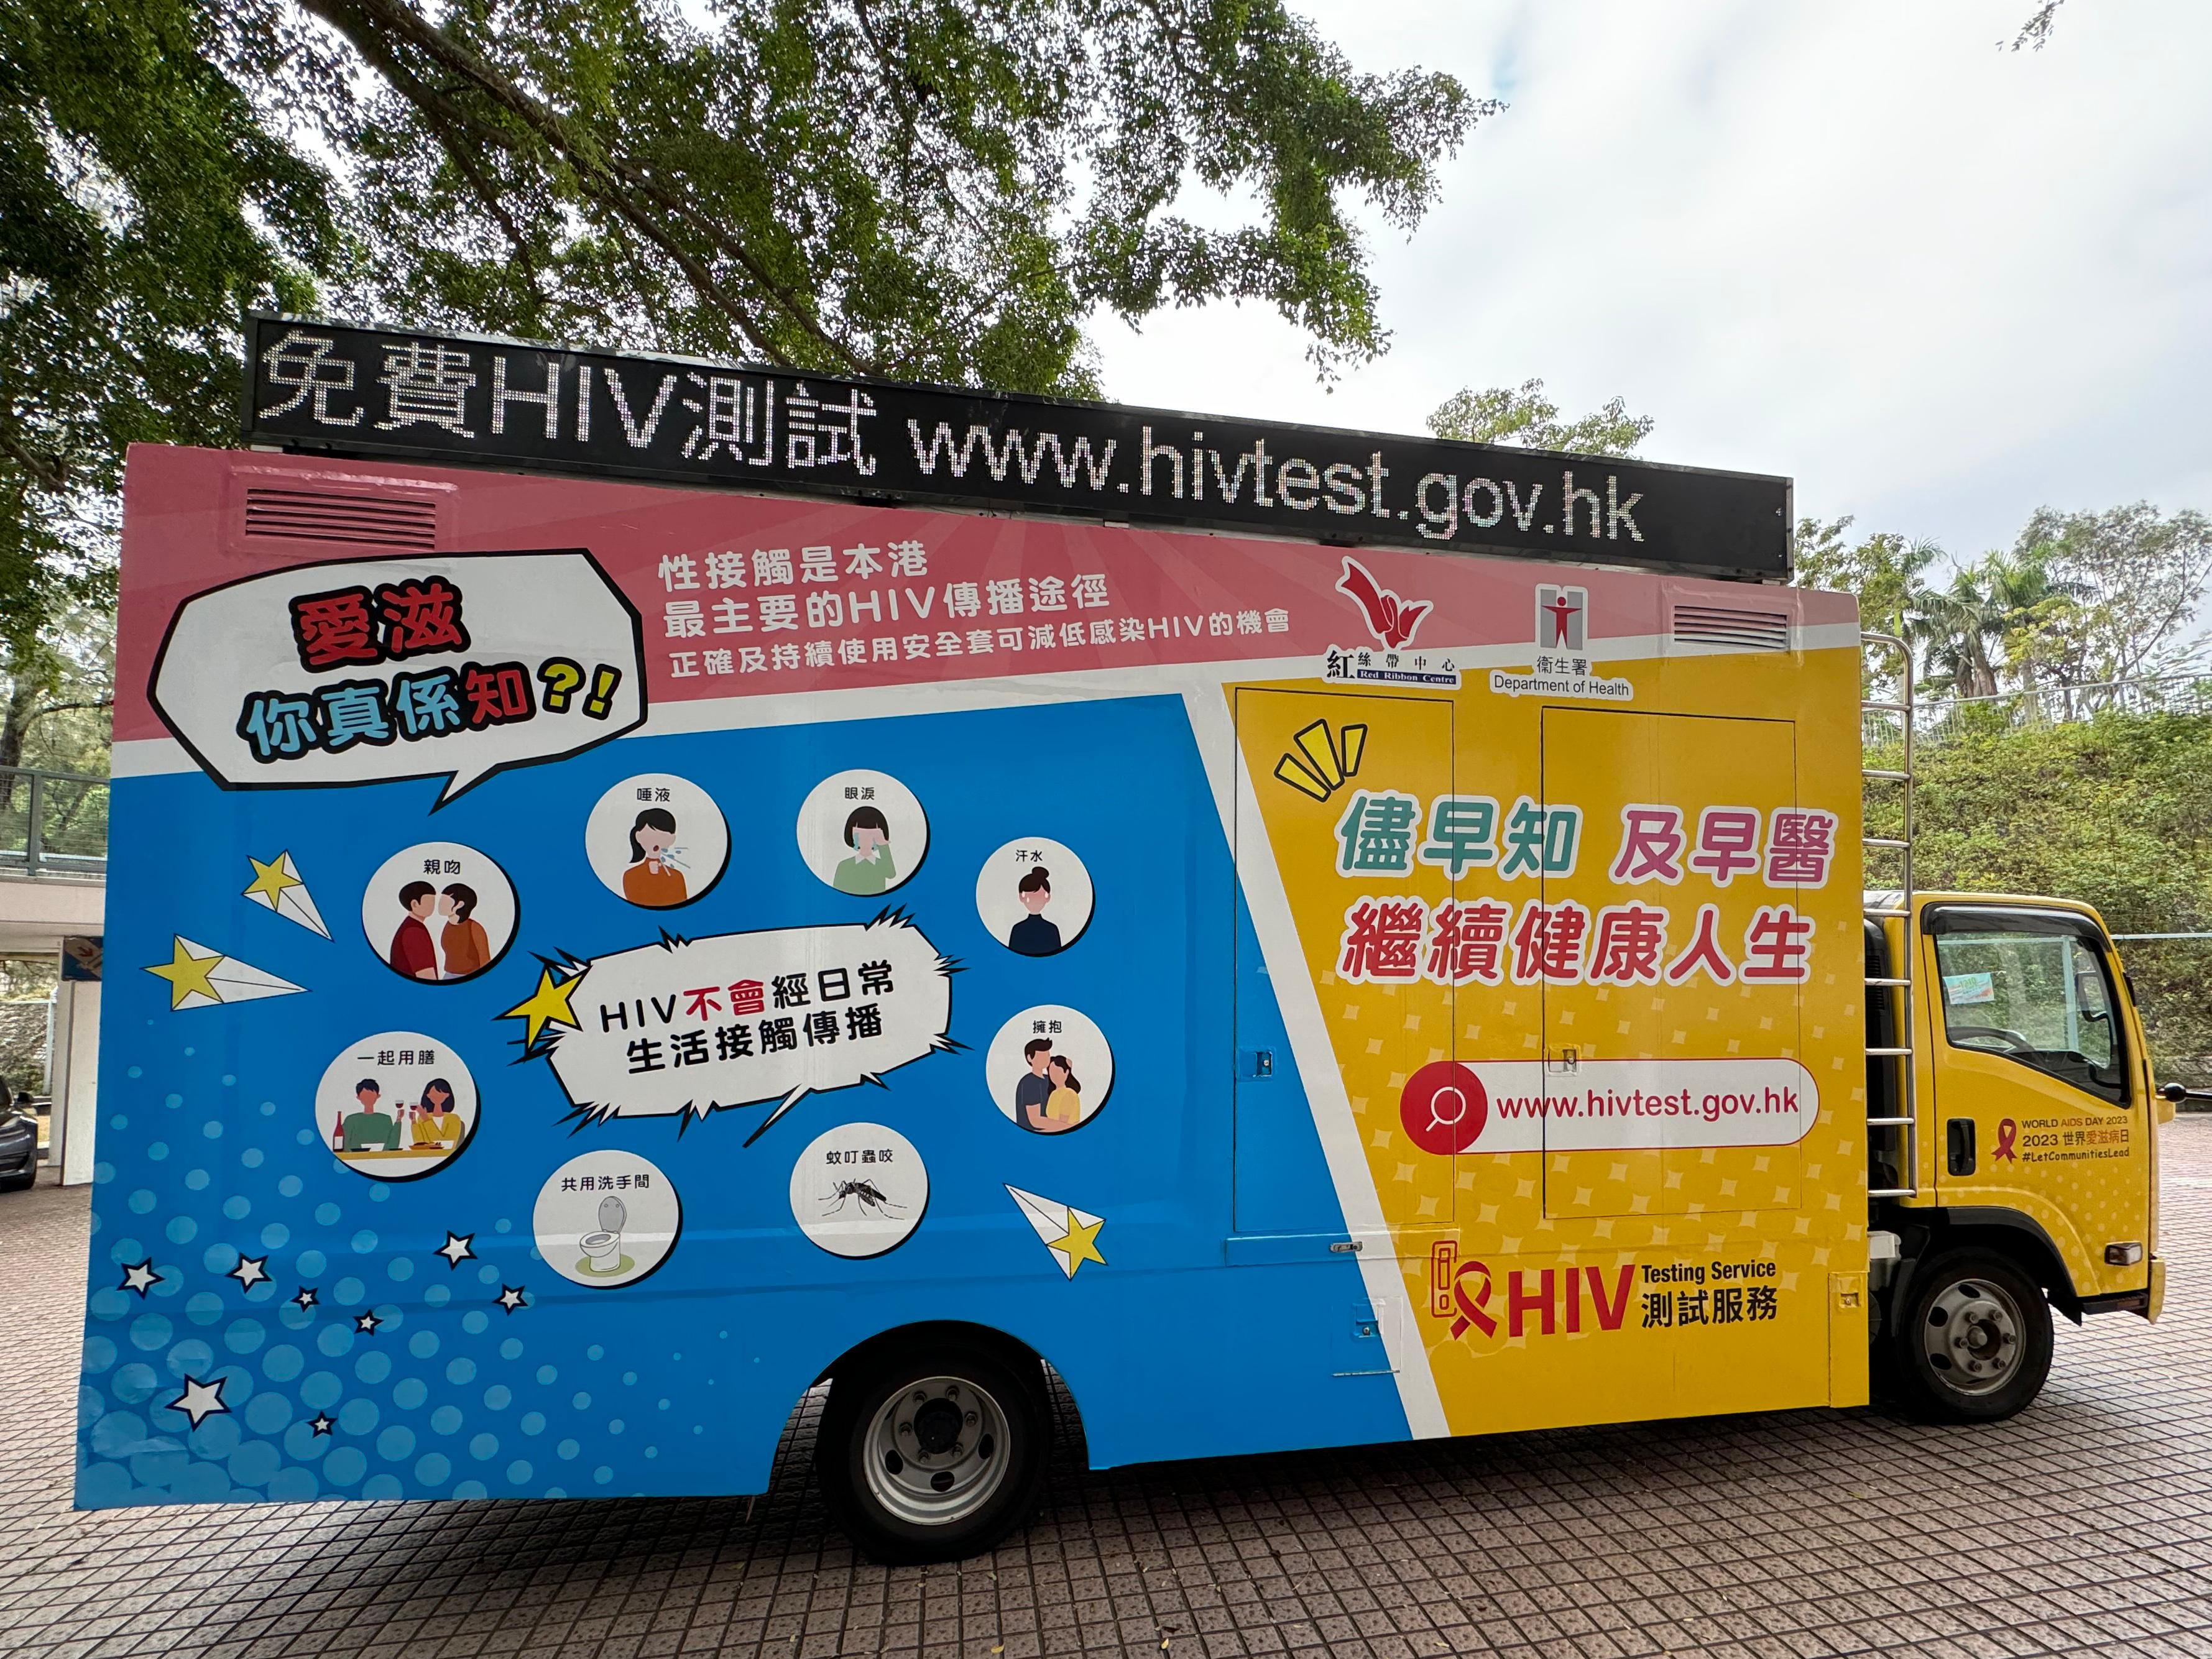 In support of World AIDS Day, the Department of Health has arranged a Human Immunodeficiency Virus (HIV) Testing Service promotion vehicle to visit various locations in Hong Kong from today (December 1) to raise public awareness of Acquired Immune Deficiency Syndrome (AIDS), promote HIV testing services and appeal to the public to care about people living with AIDS. Photo shows the HIV Testing Service promotion vehicle.